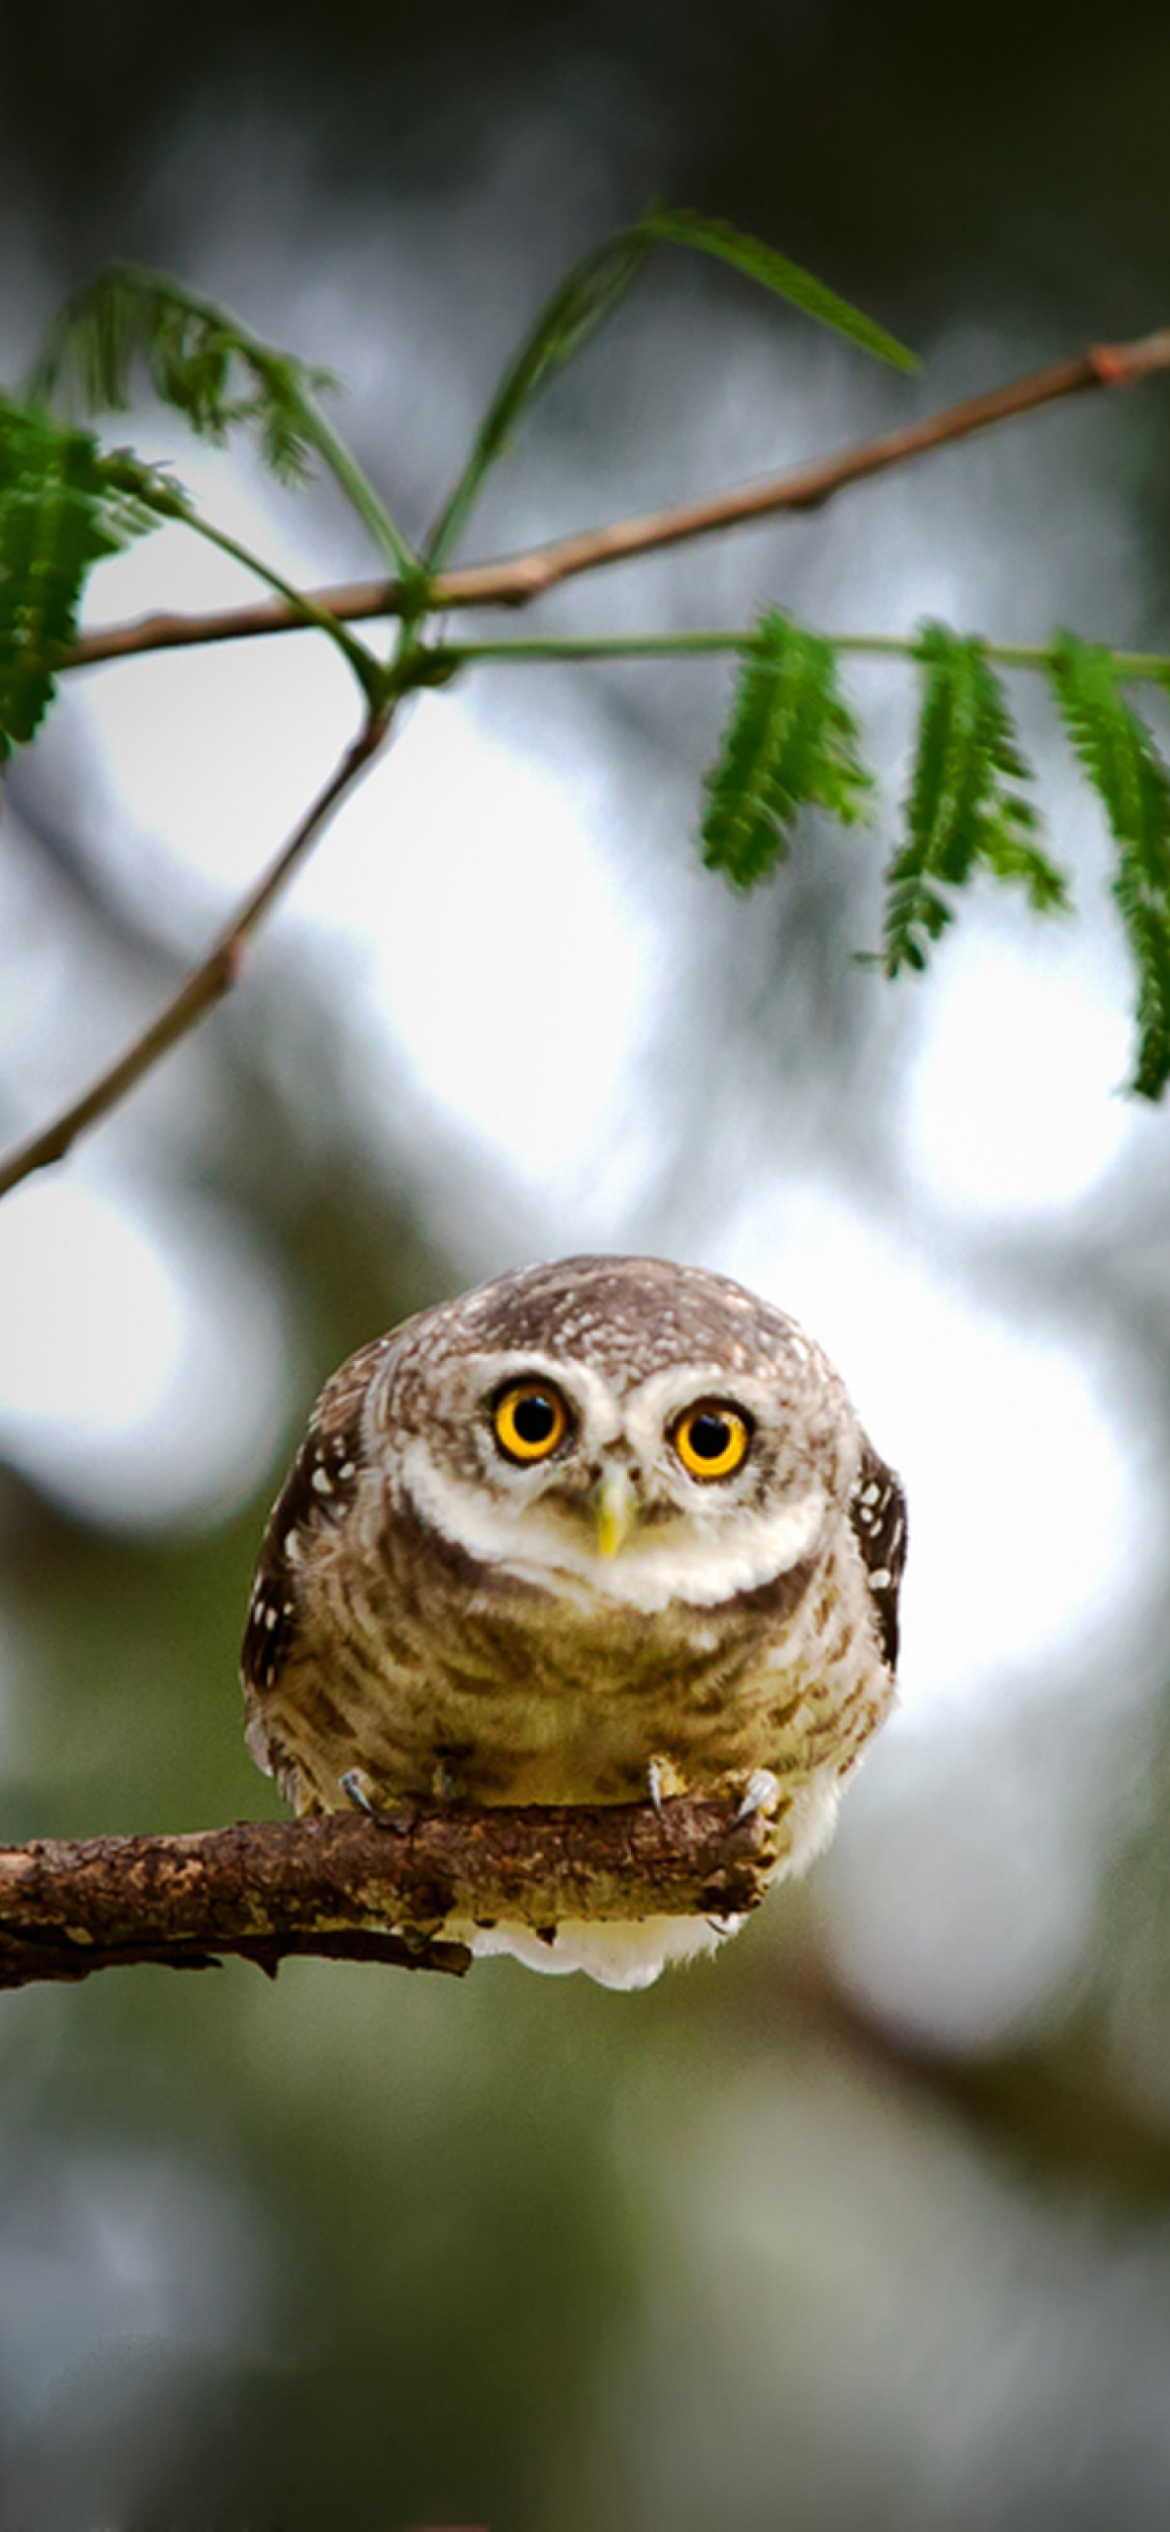 Cute And Funny Little Owl With Big Eyes screenshot #1 1170x2532